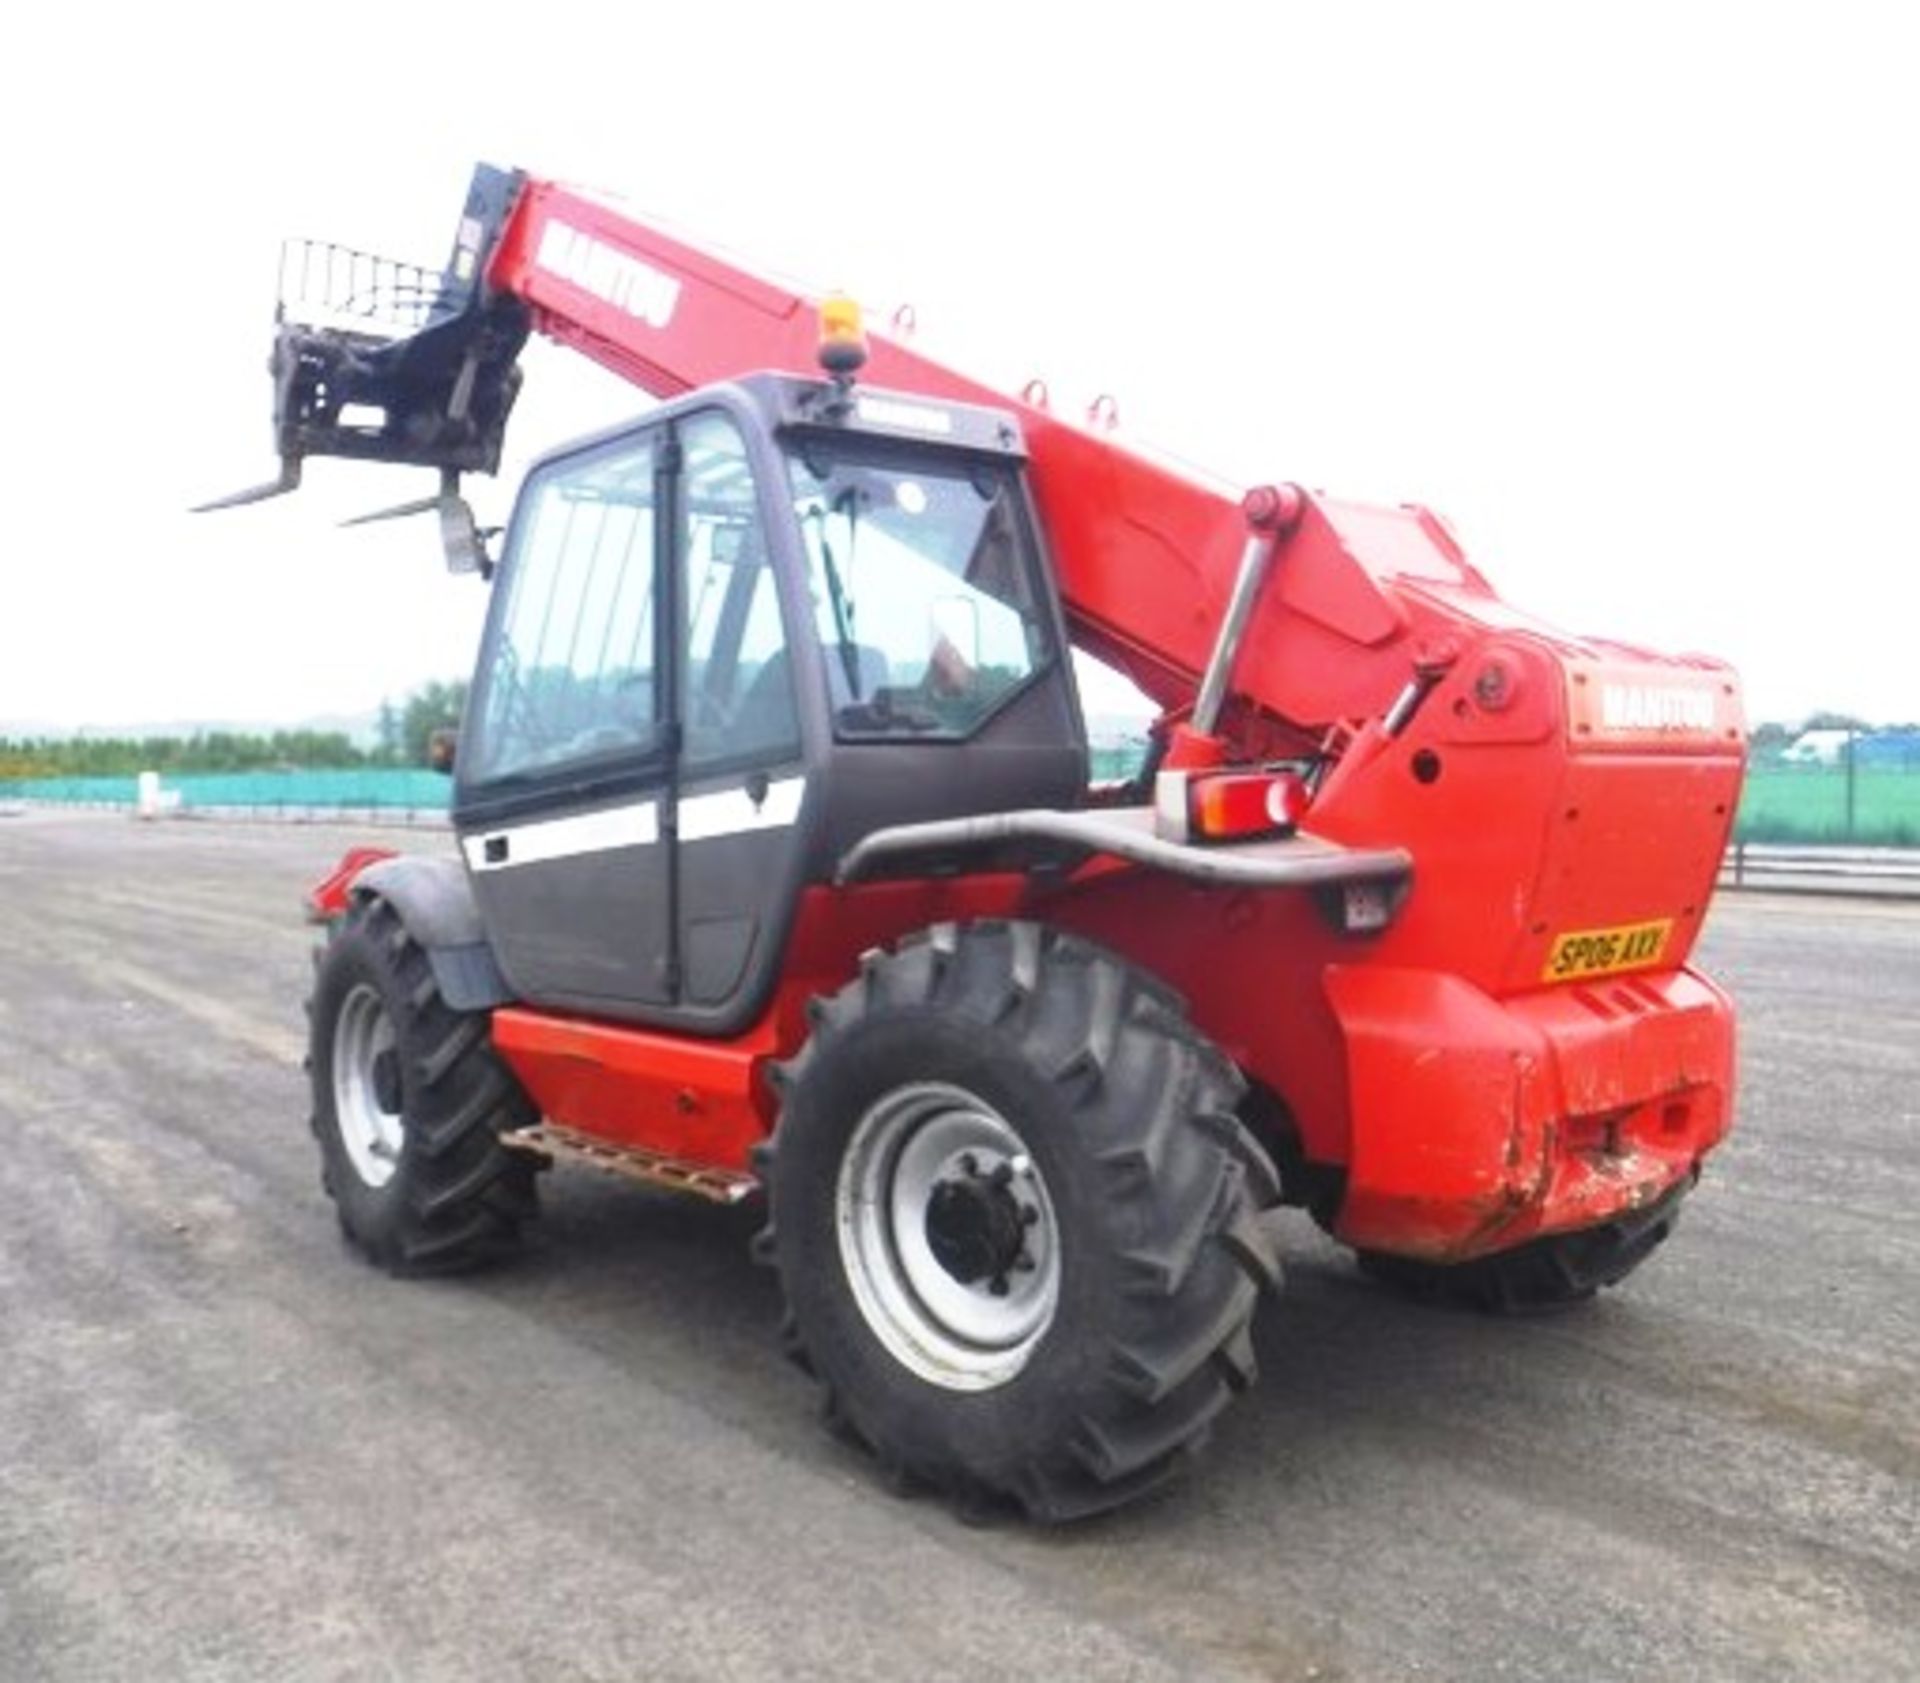 2006 MANITOU 14/35 TELEHANDLER c/w bucket & forks s/n 1230044 Reg no SP06 AXX 2646hrs (not verified) - Image 21 of 31